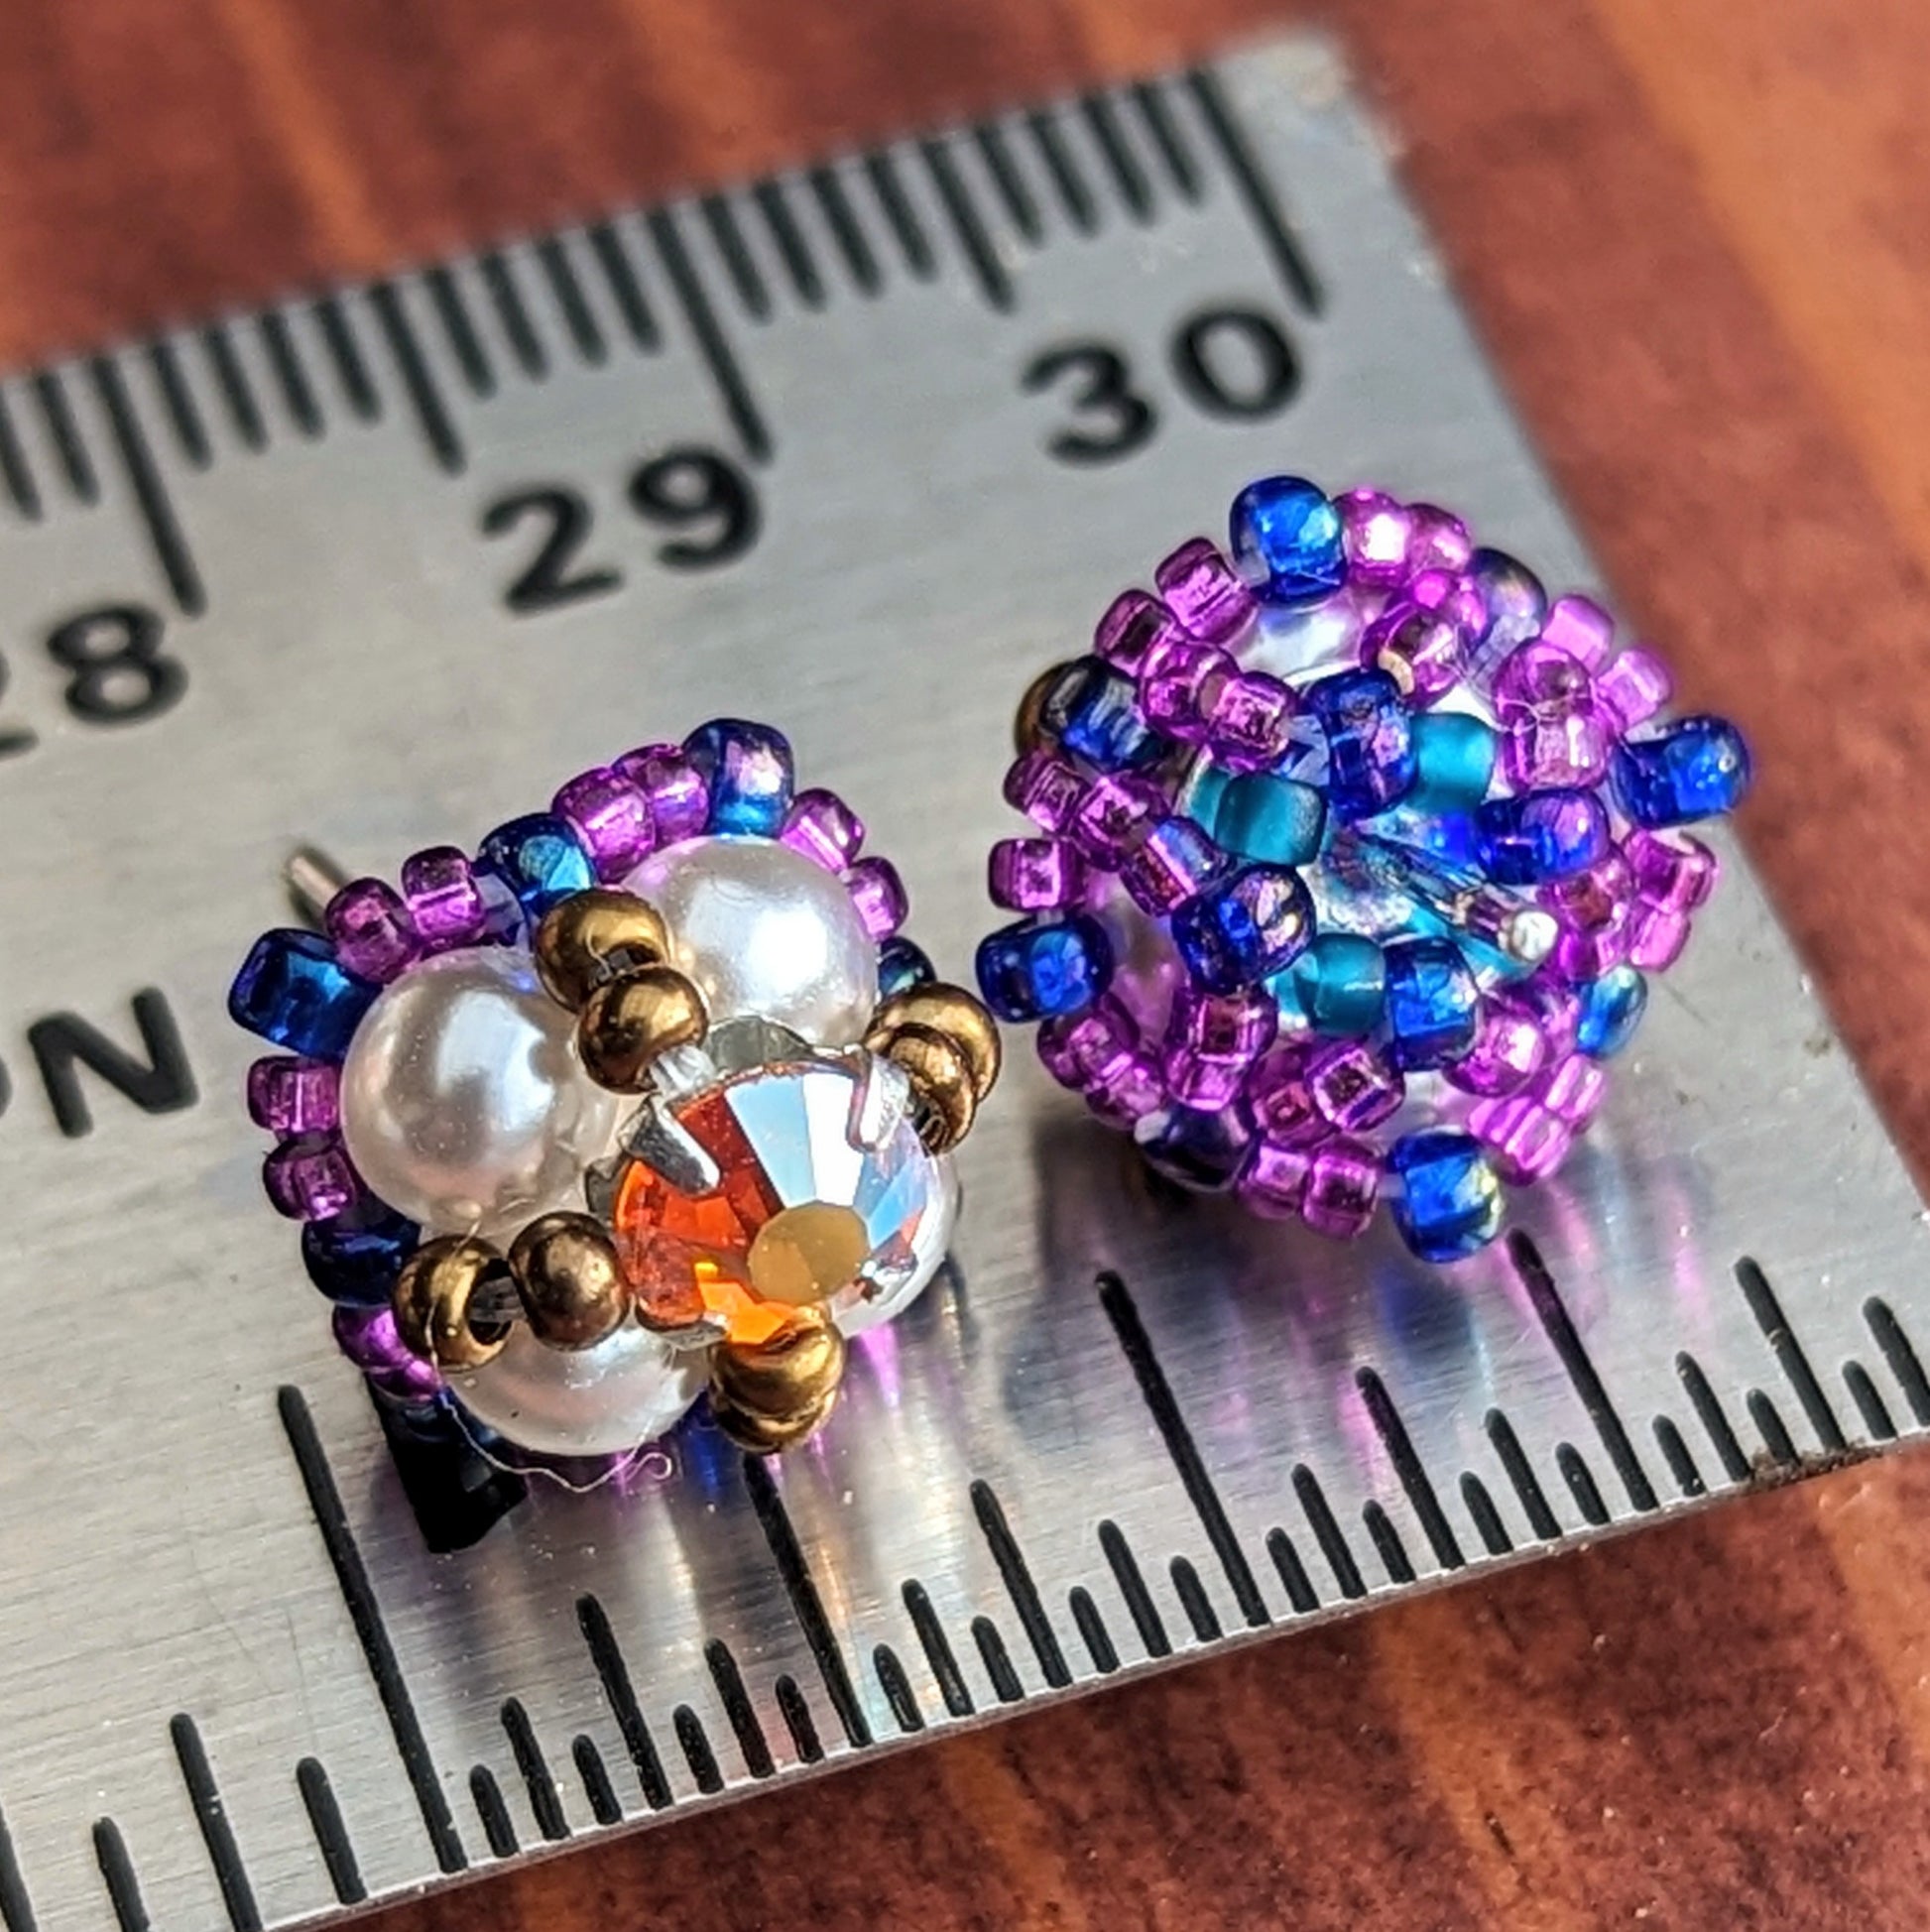 A pair of square stud earrings resting on a metal ruler to show that they are a little less than a half inch across. The studs are placed with one facing forwards and one showing the back, which has a net of small beads holding the finding in place. The forward-facing earring has four pearly white beads with a golden-orange rhinestone. The rhinestone is held in place by an x-shape of antique gold seed beads. The outside of the earrings is outlined in grape purple and dark electric purple seed beads.